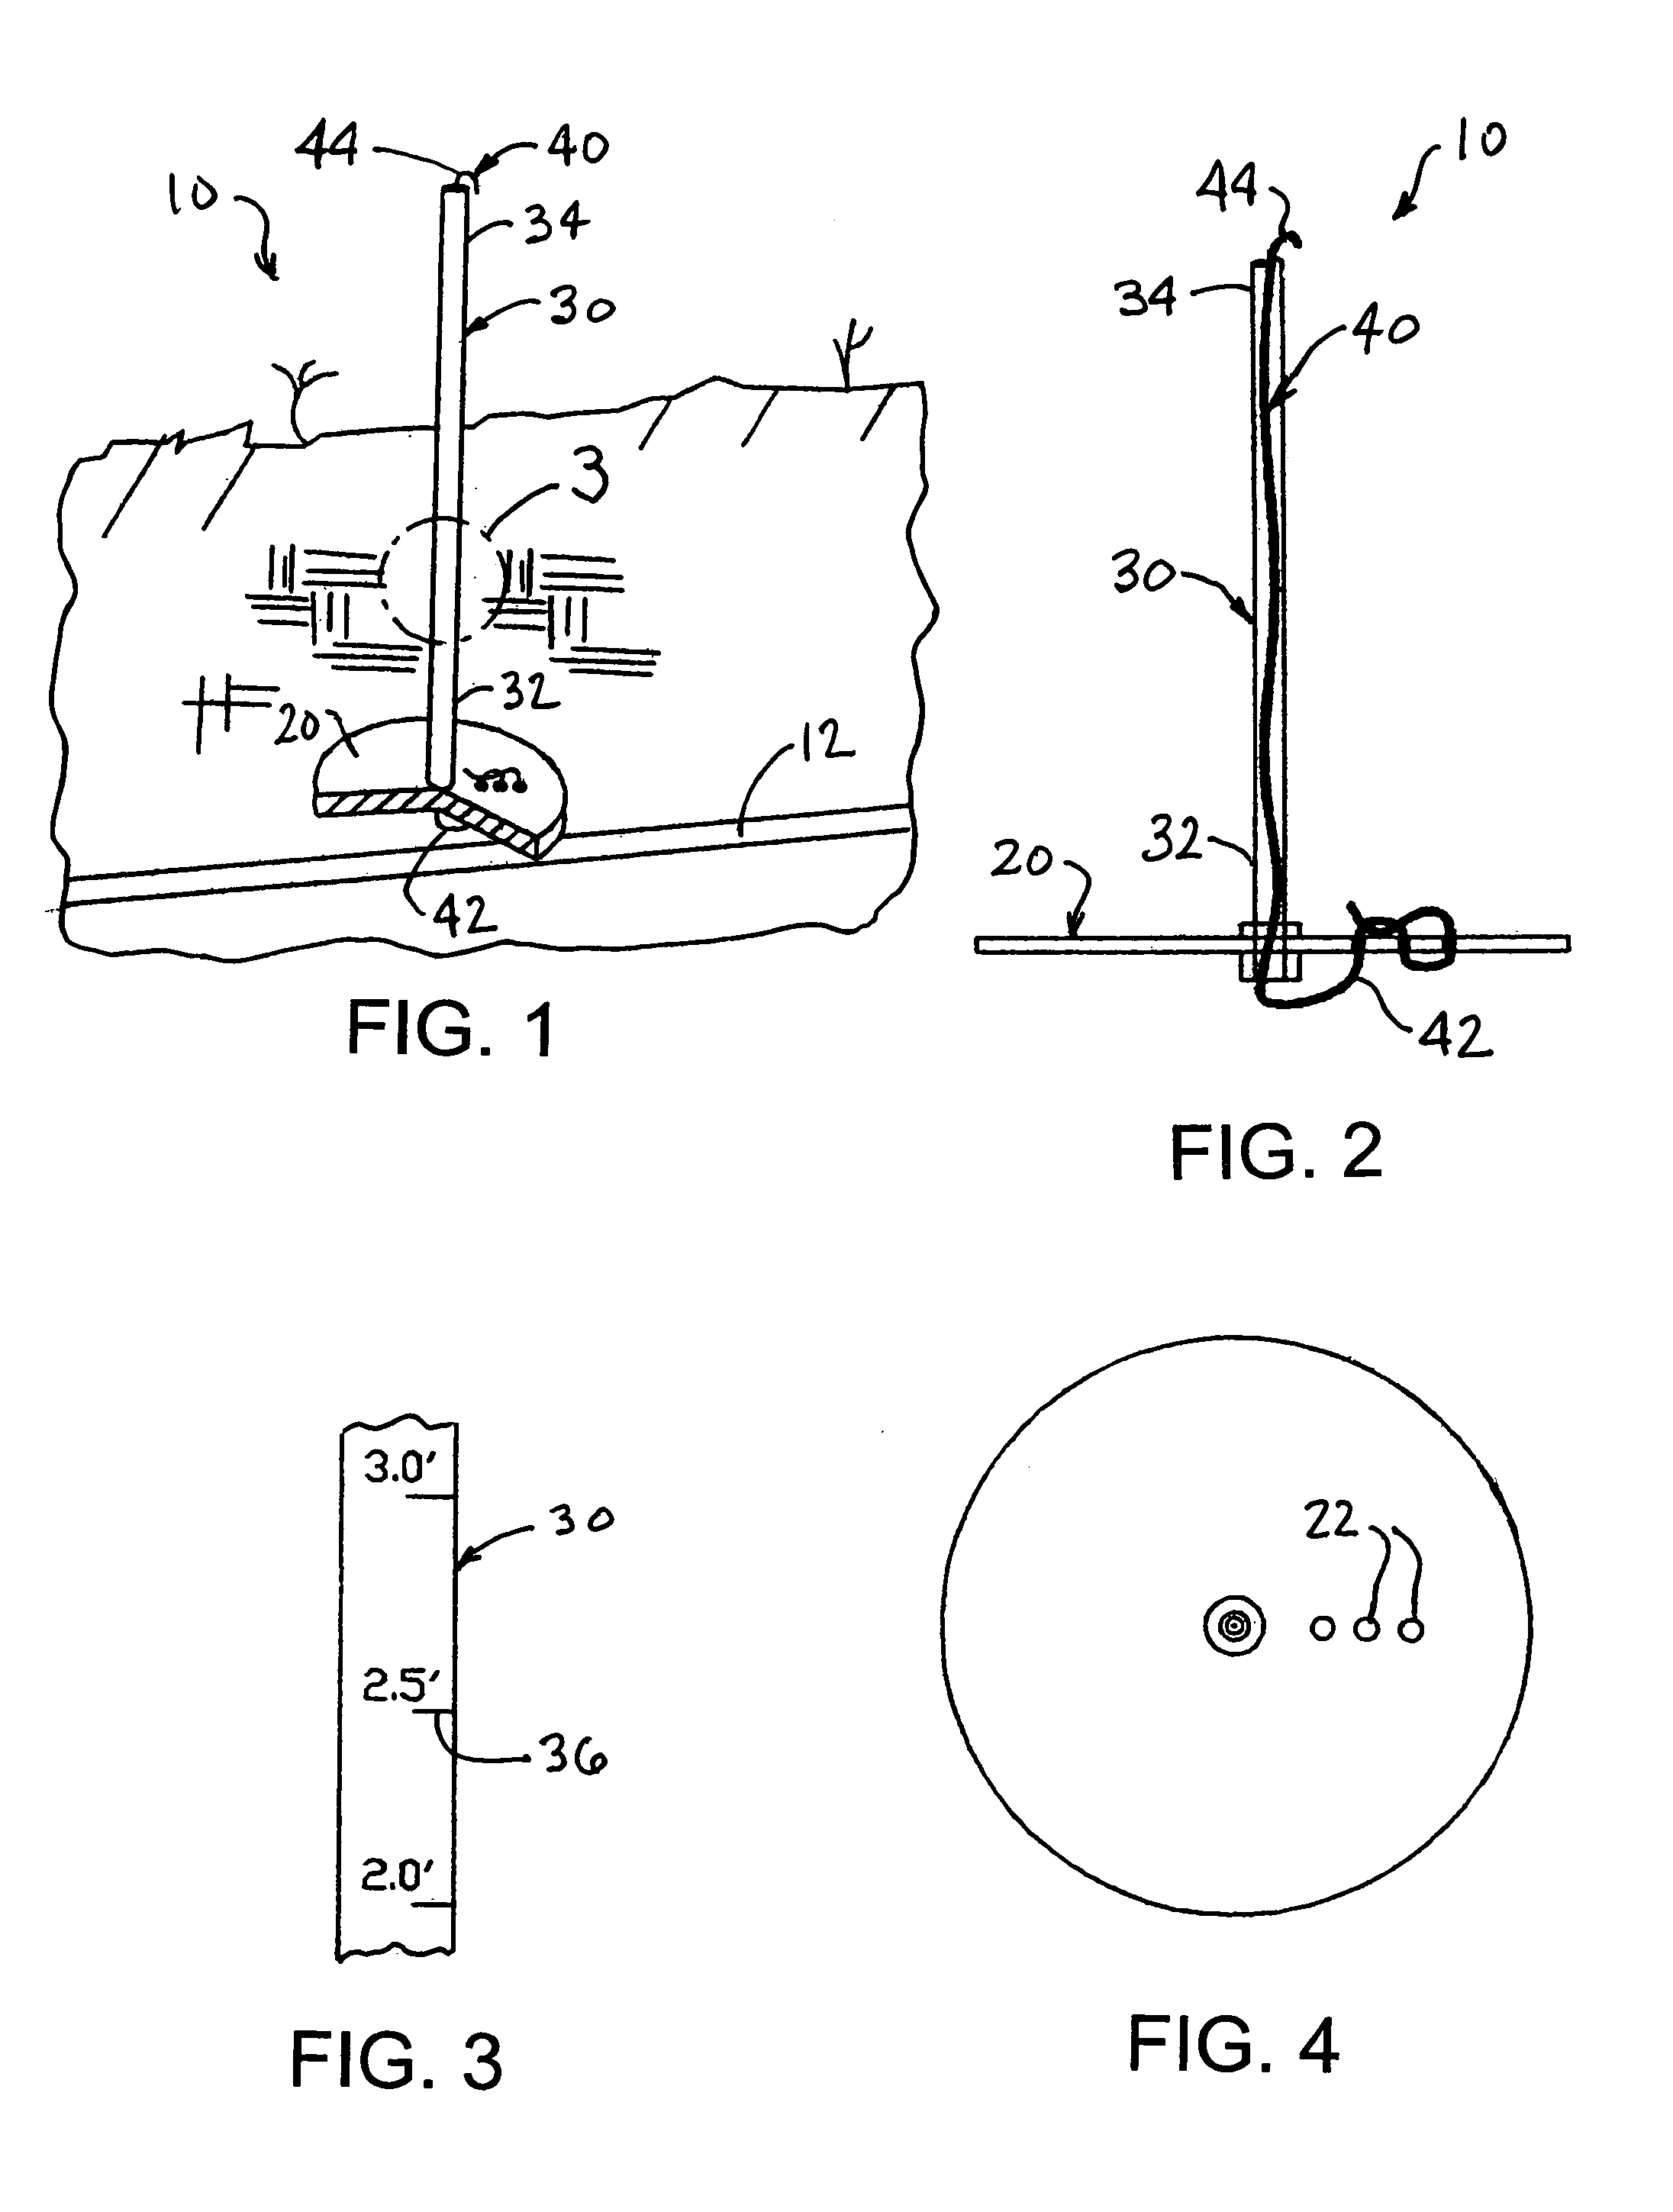 Underground marking systems and methods for identifying a location of an object underground